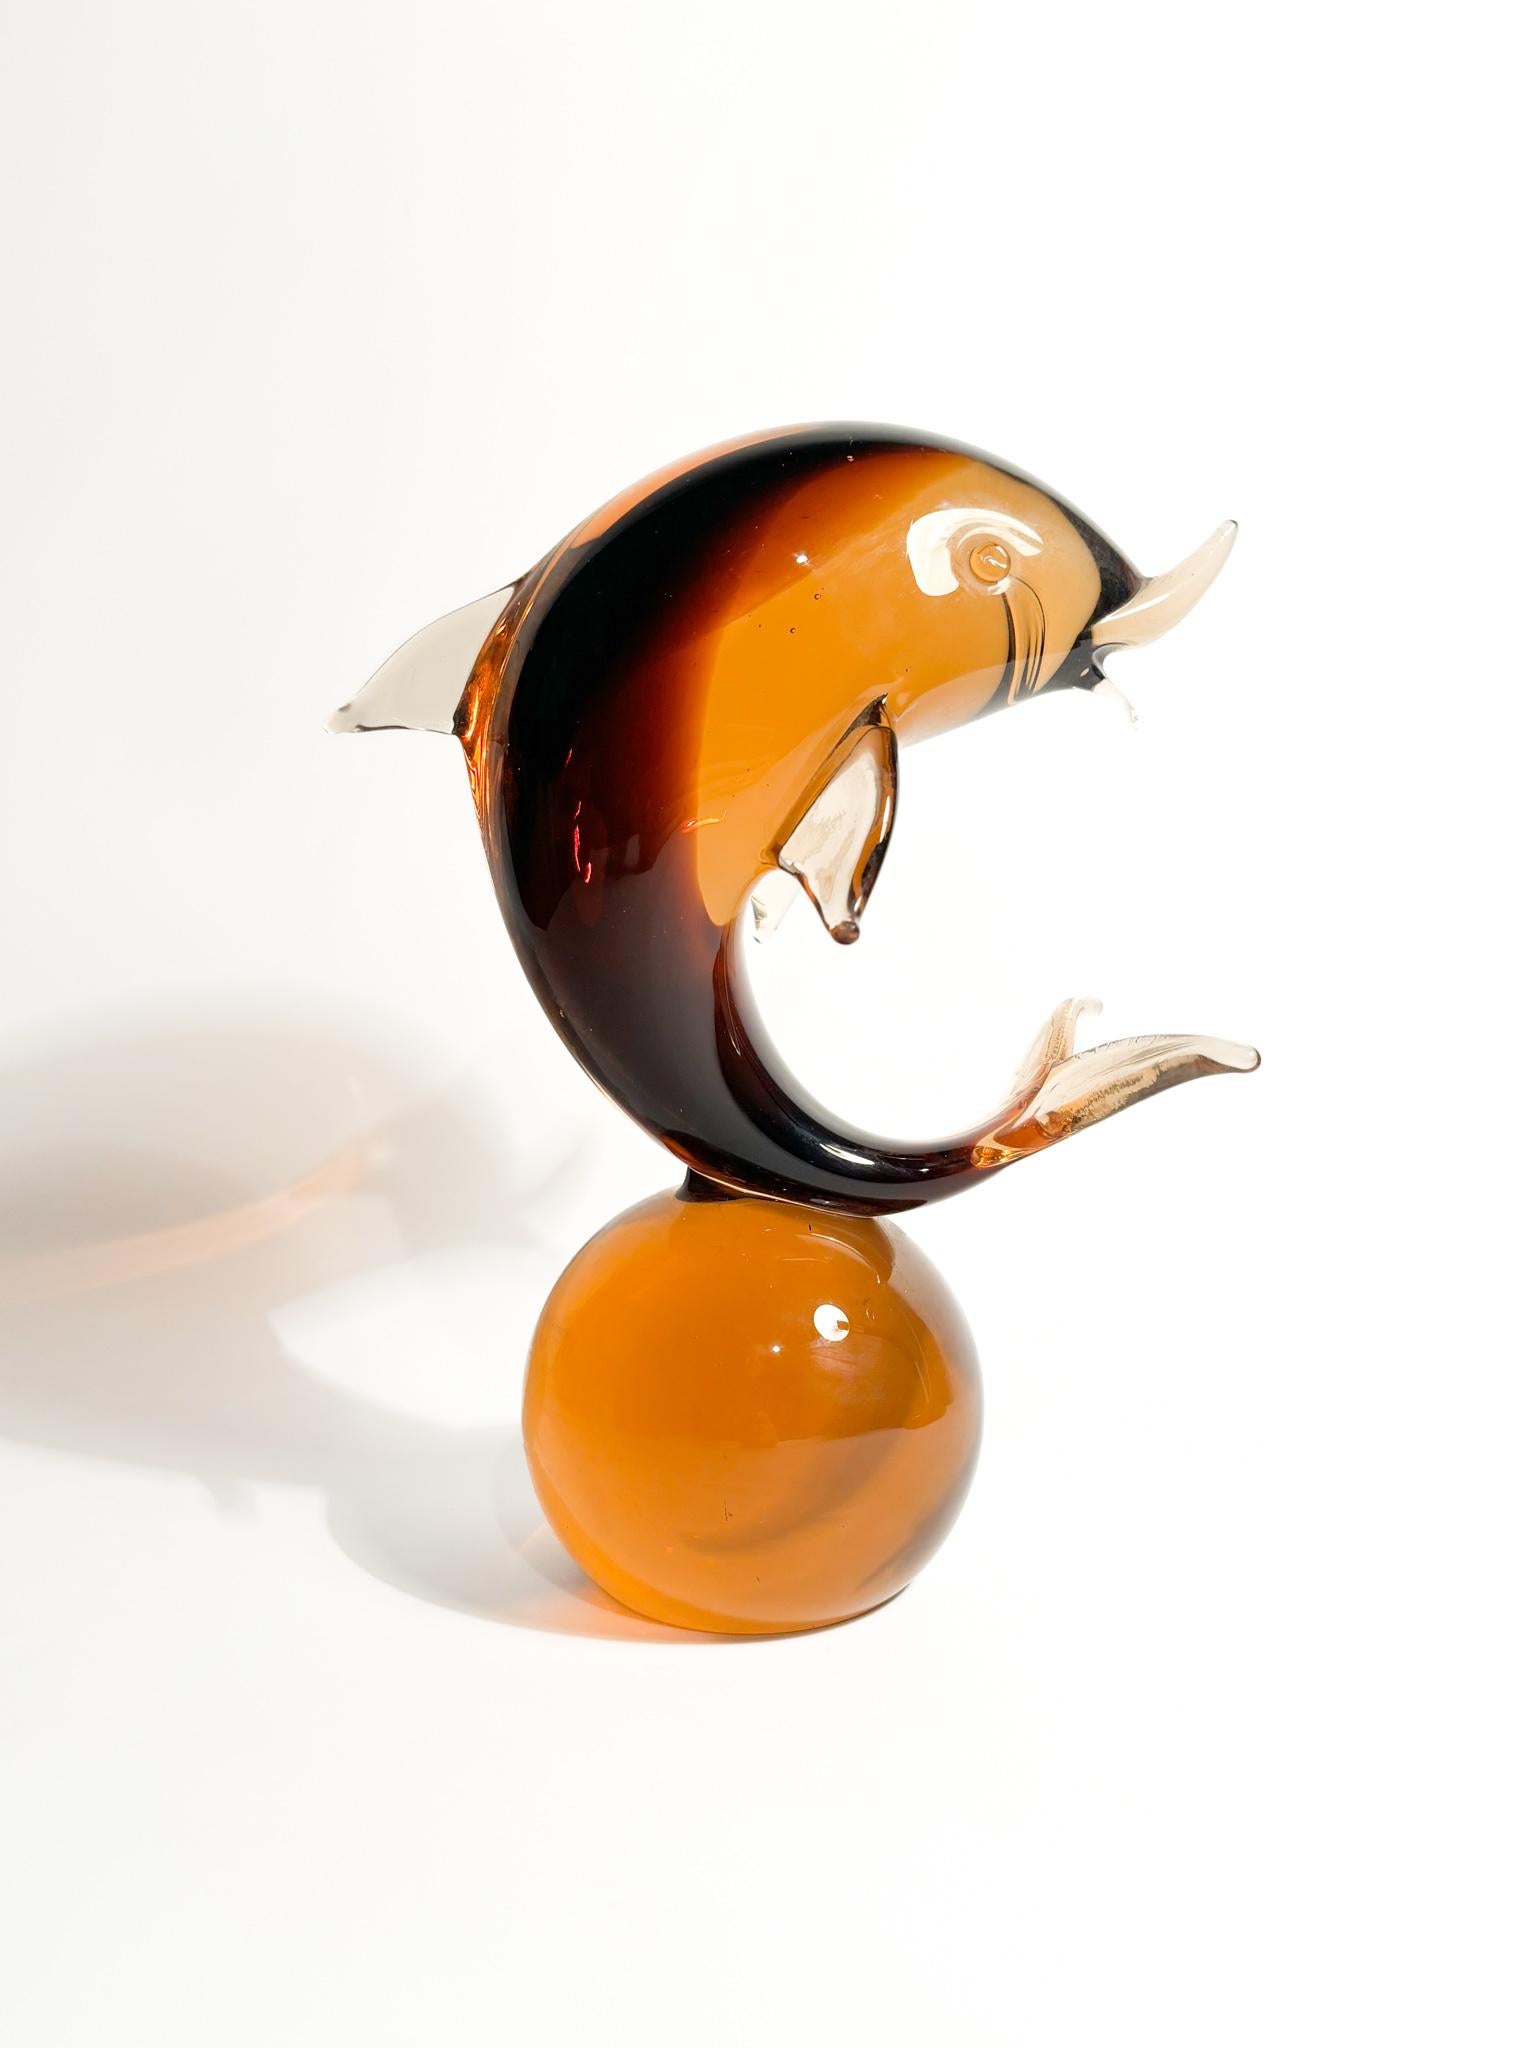 Dolphin sculpture on an orange Murano glass ball, whose creation is attributed to Seguso in the 1960s

Ø 9 cm Ø 19 cm h 23 cm

Seguso is a family name synonymous with Murano glass, a prestigious form of Venetian glassmaking known for its artistry,